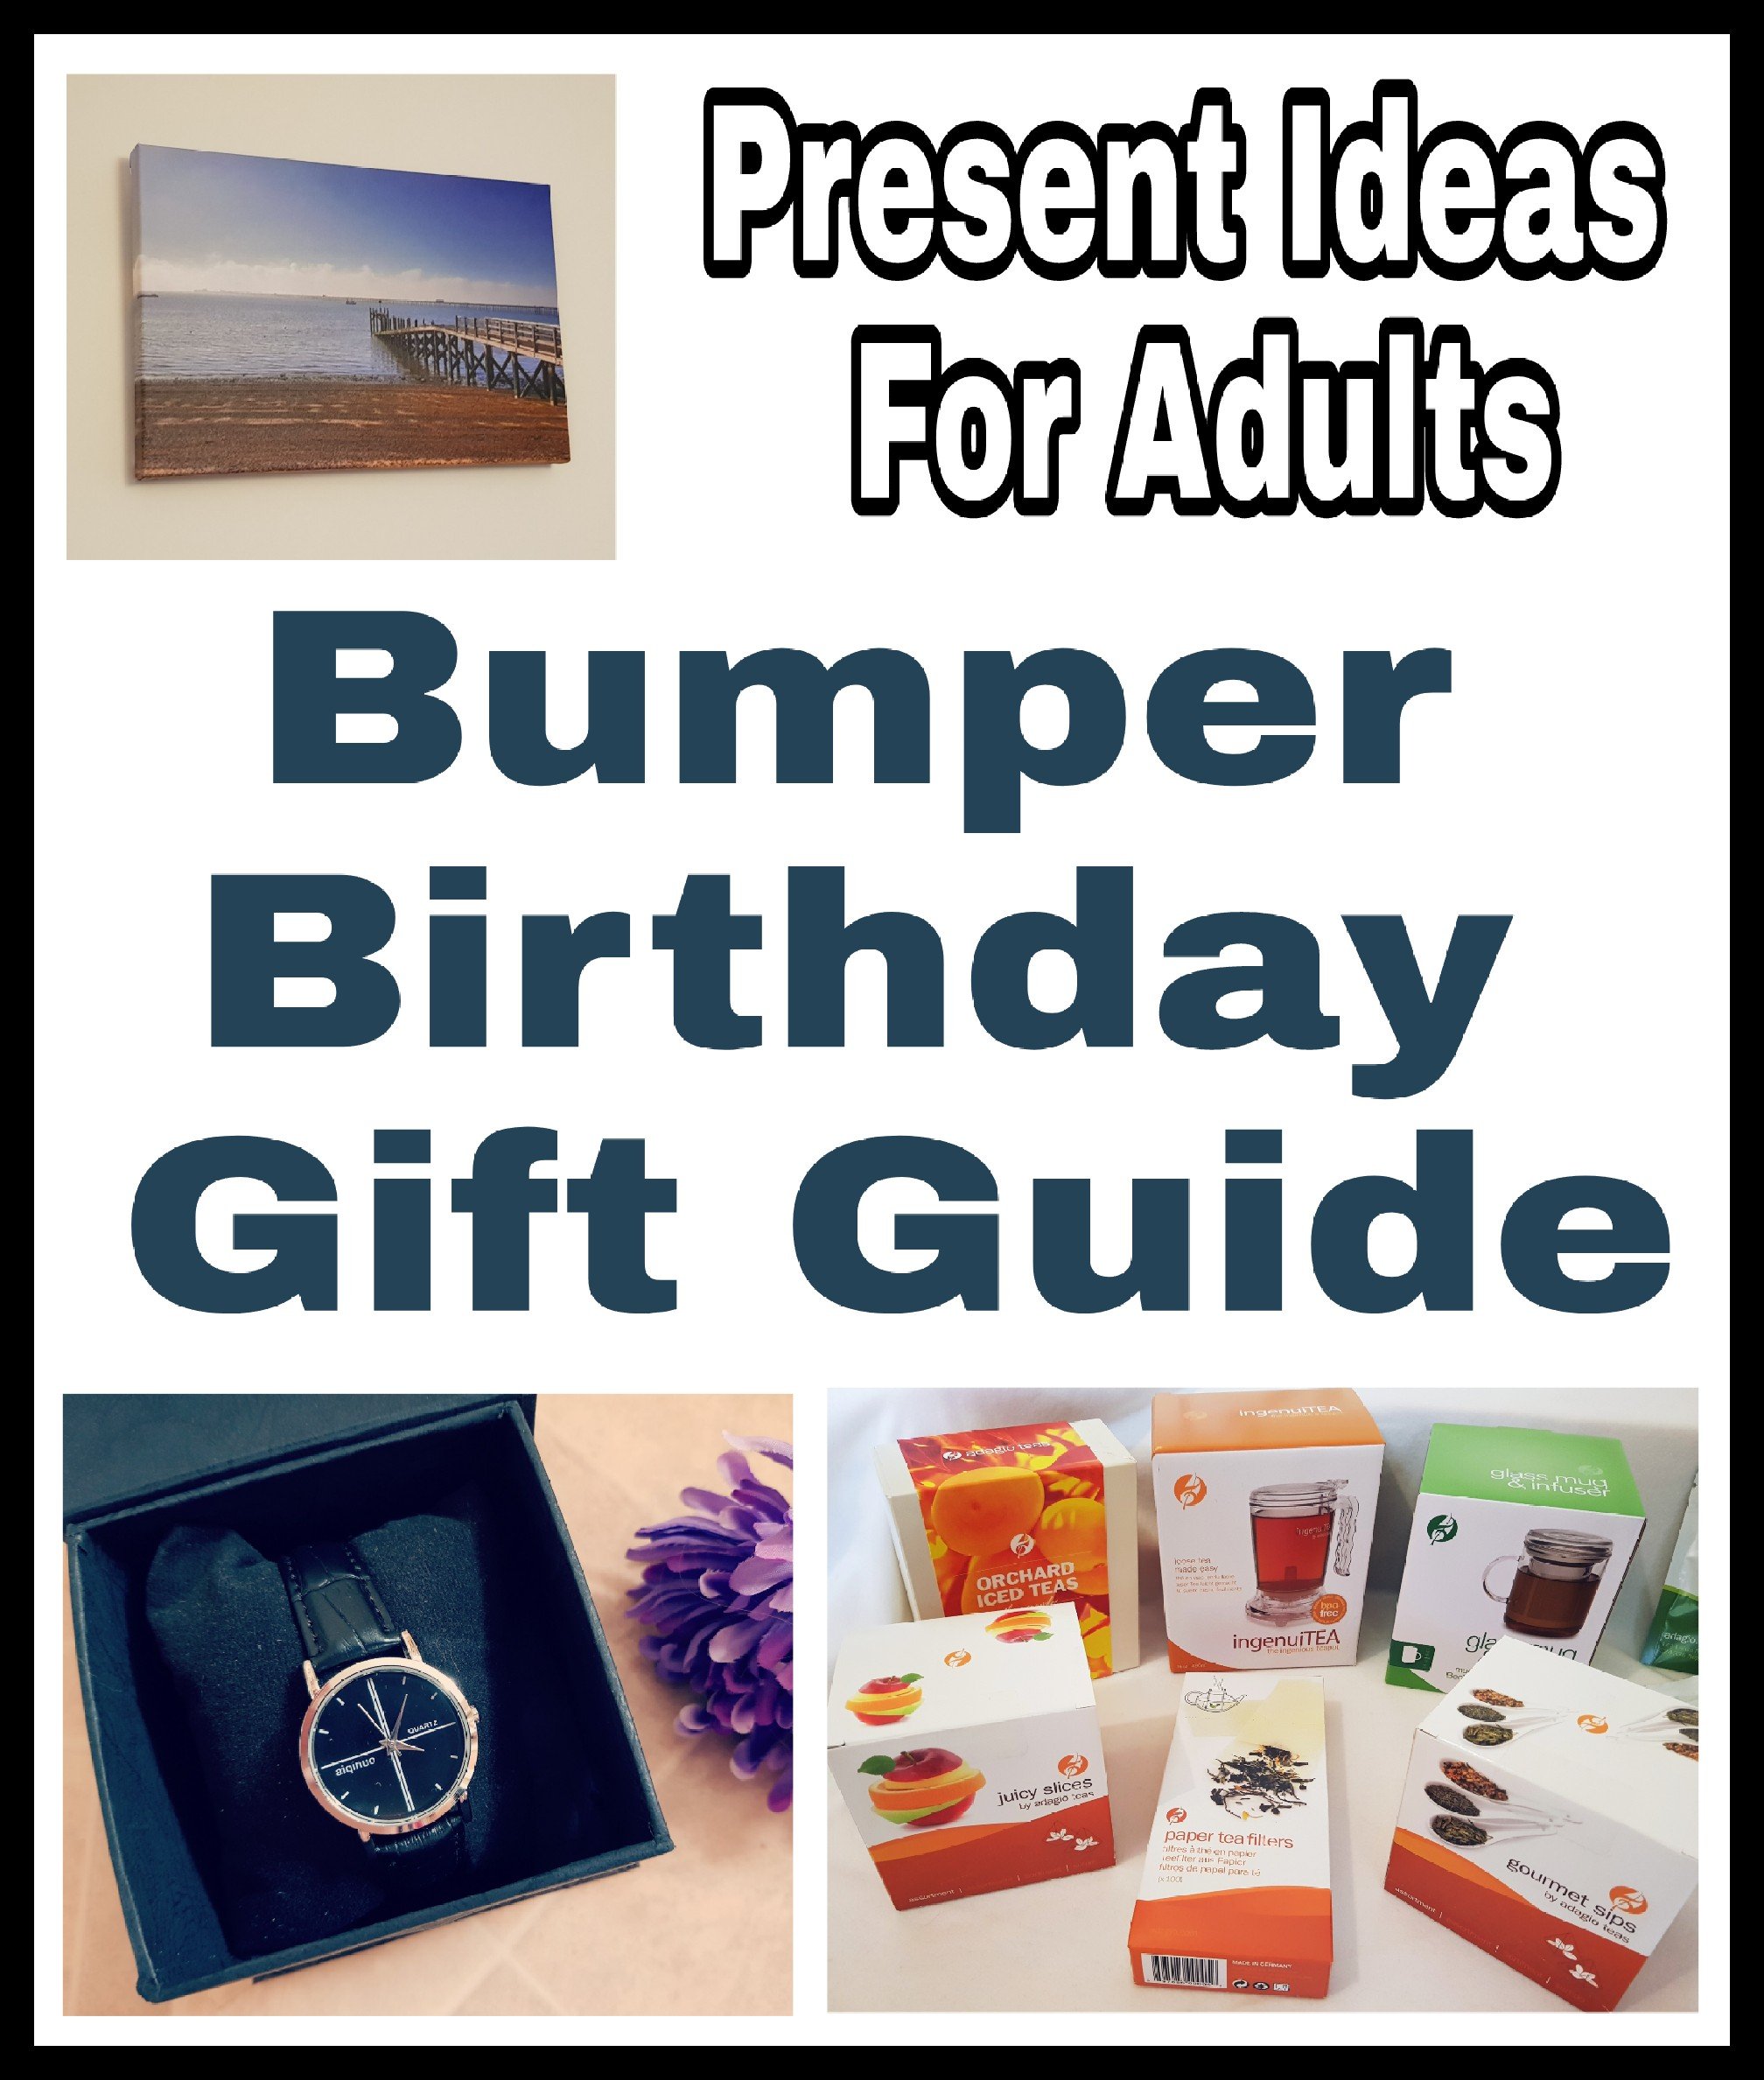 Bumper Birthday Gift Guide: Present Ideas For Adults